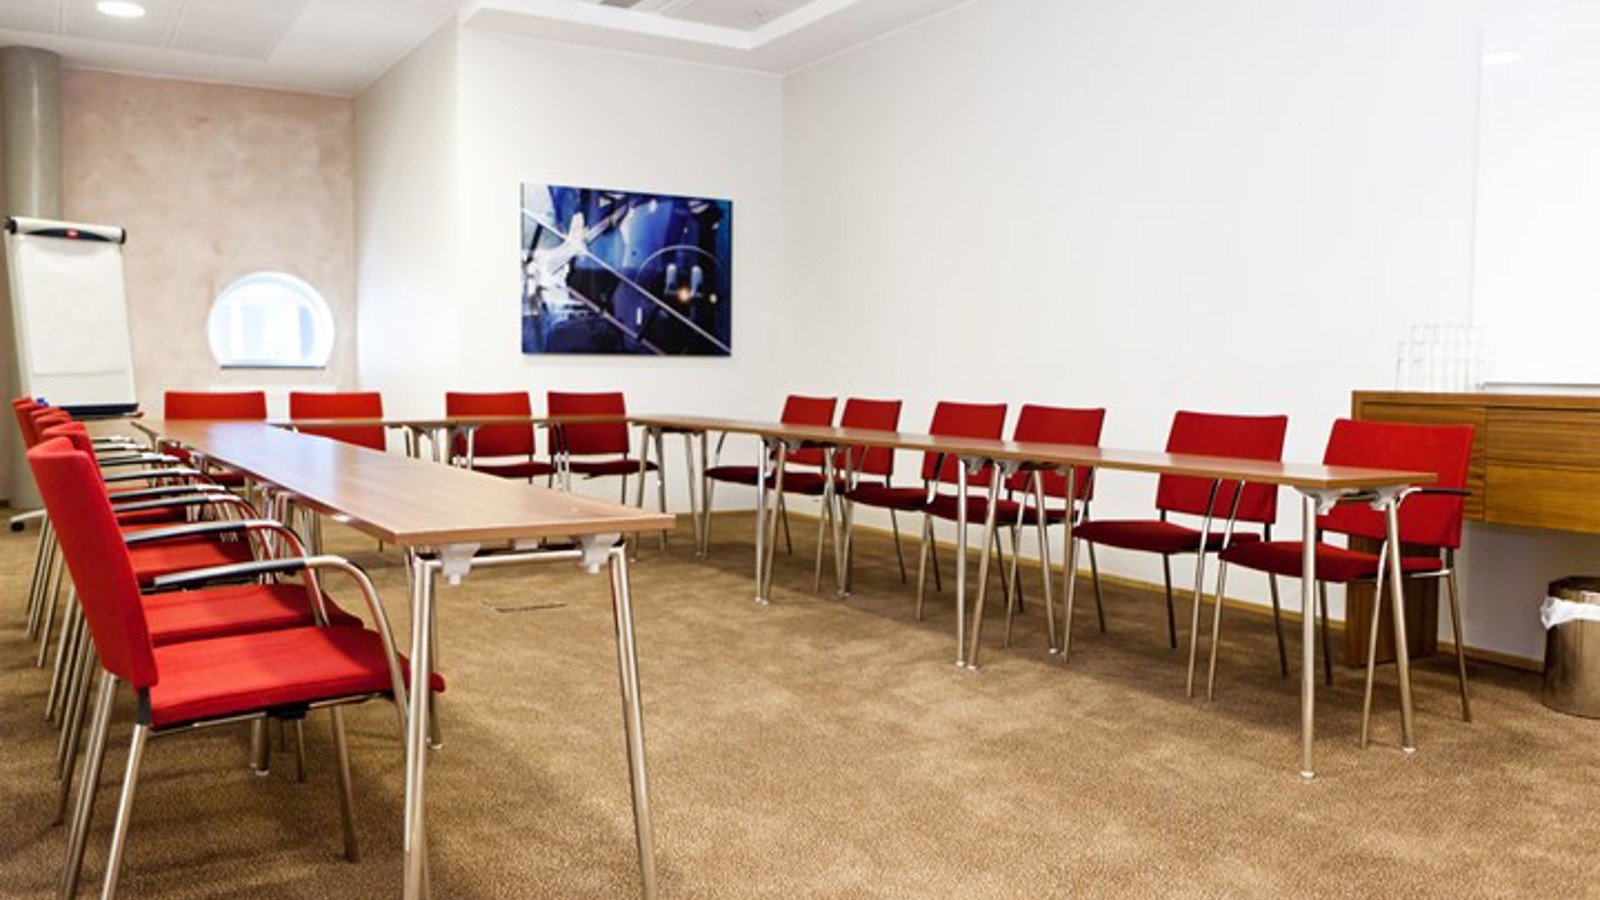 Conference room with cinema seating, red chairs, light gray floor and white walls